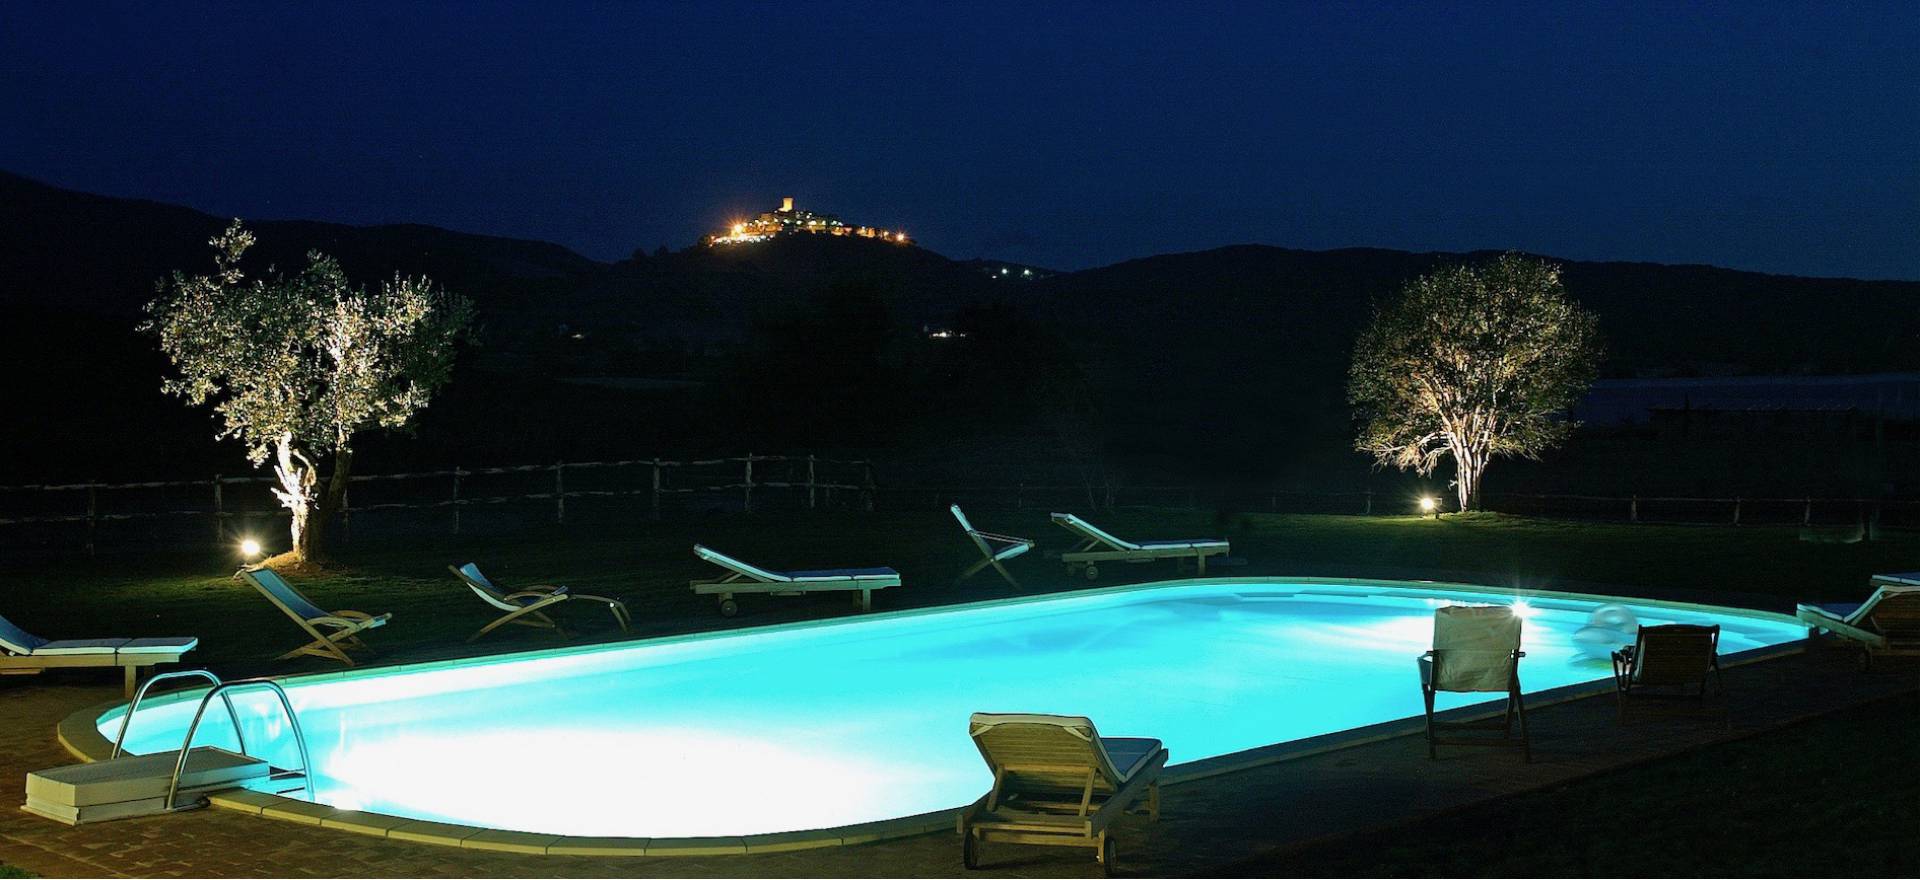 Agriturismo Tuscany Romantic agriturismo Tuscany in the hills near the sea